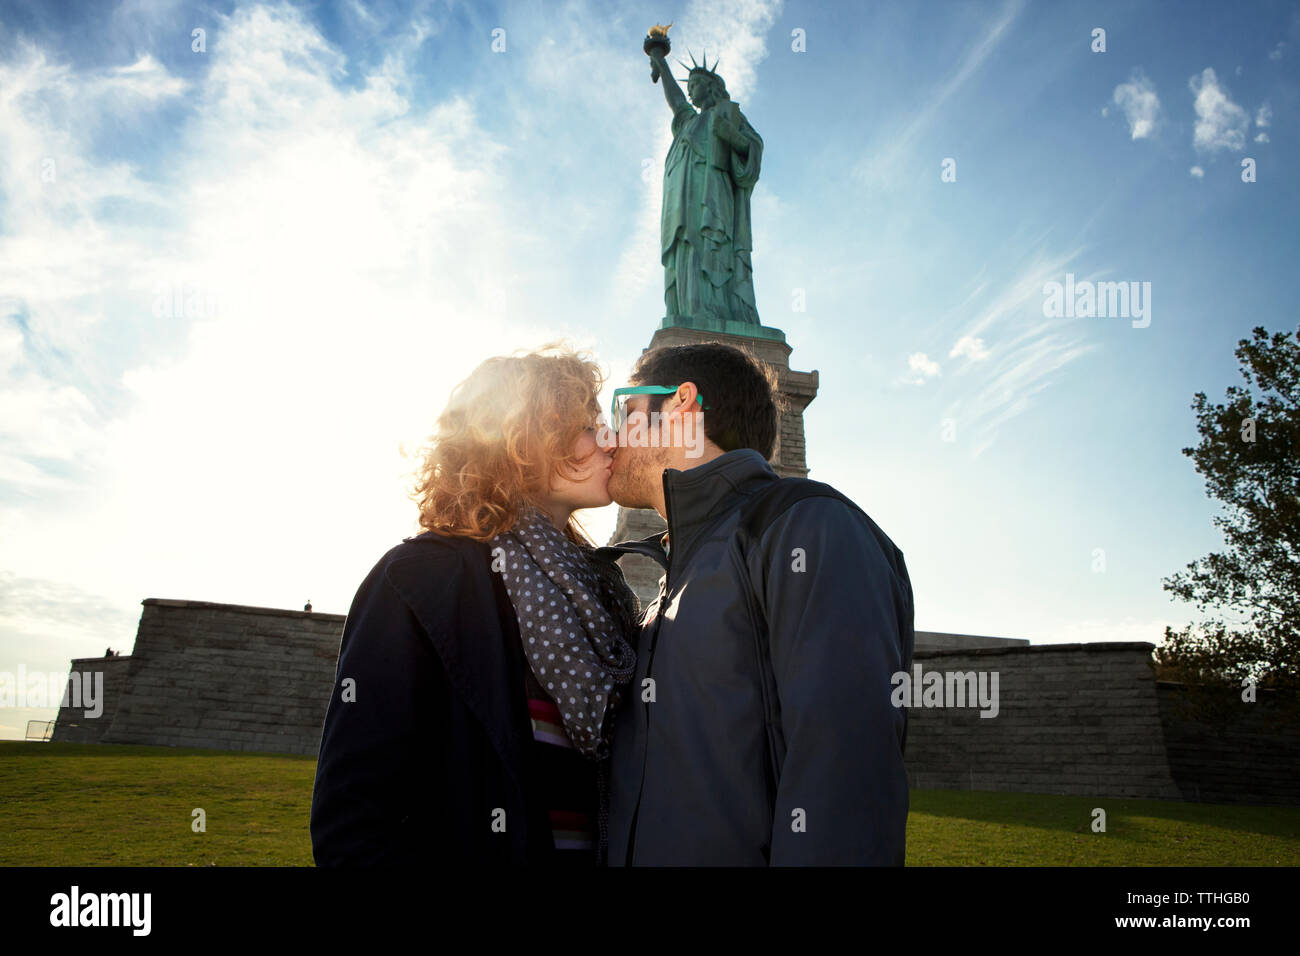 Couple kissing while standing against Statue of Liberty Stock Photo